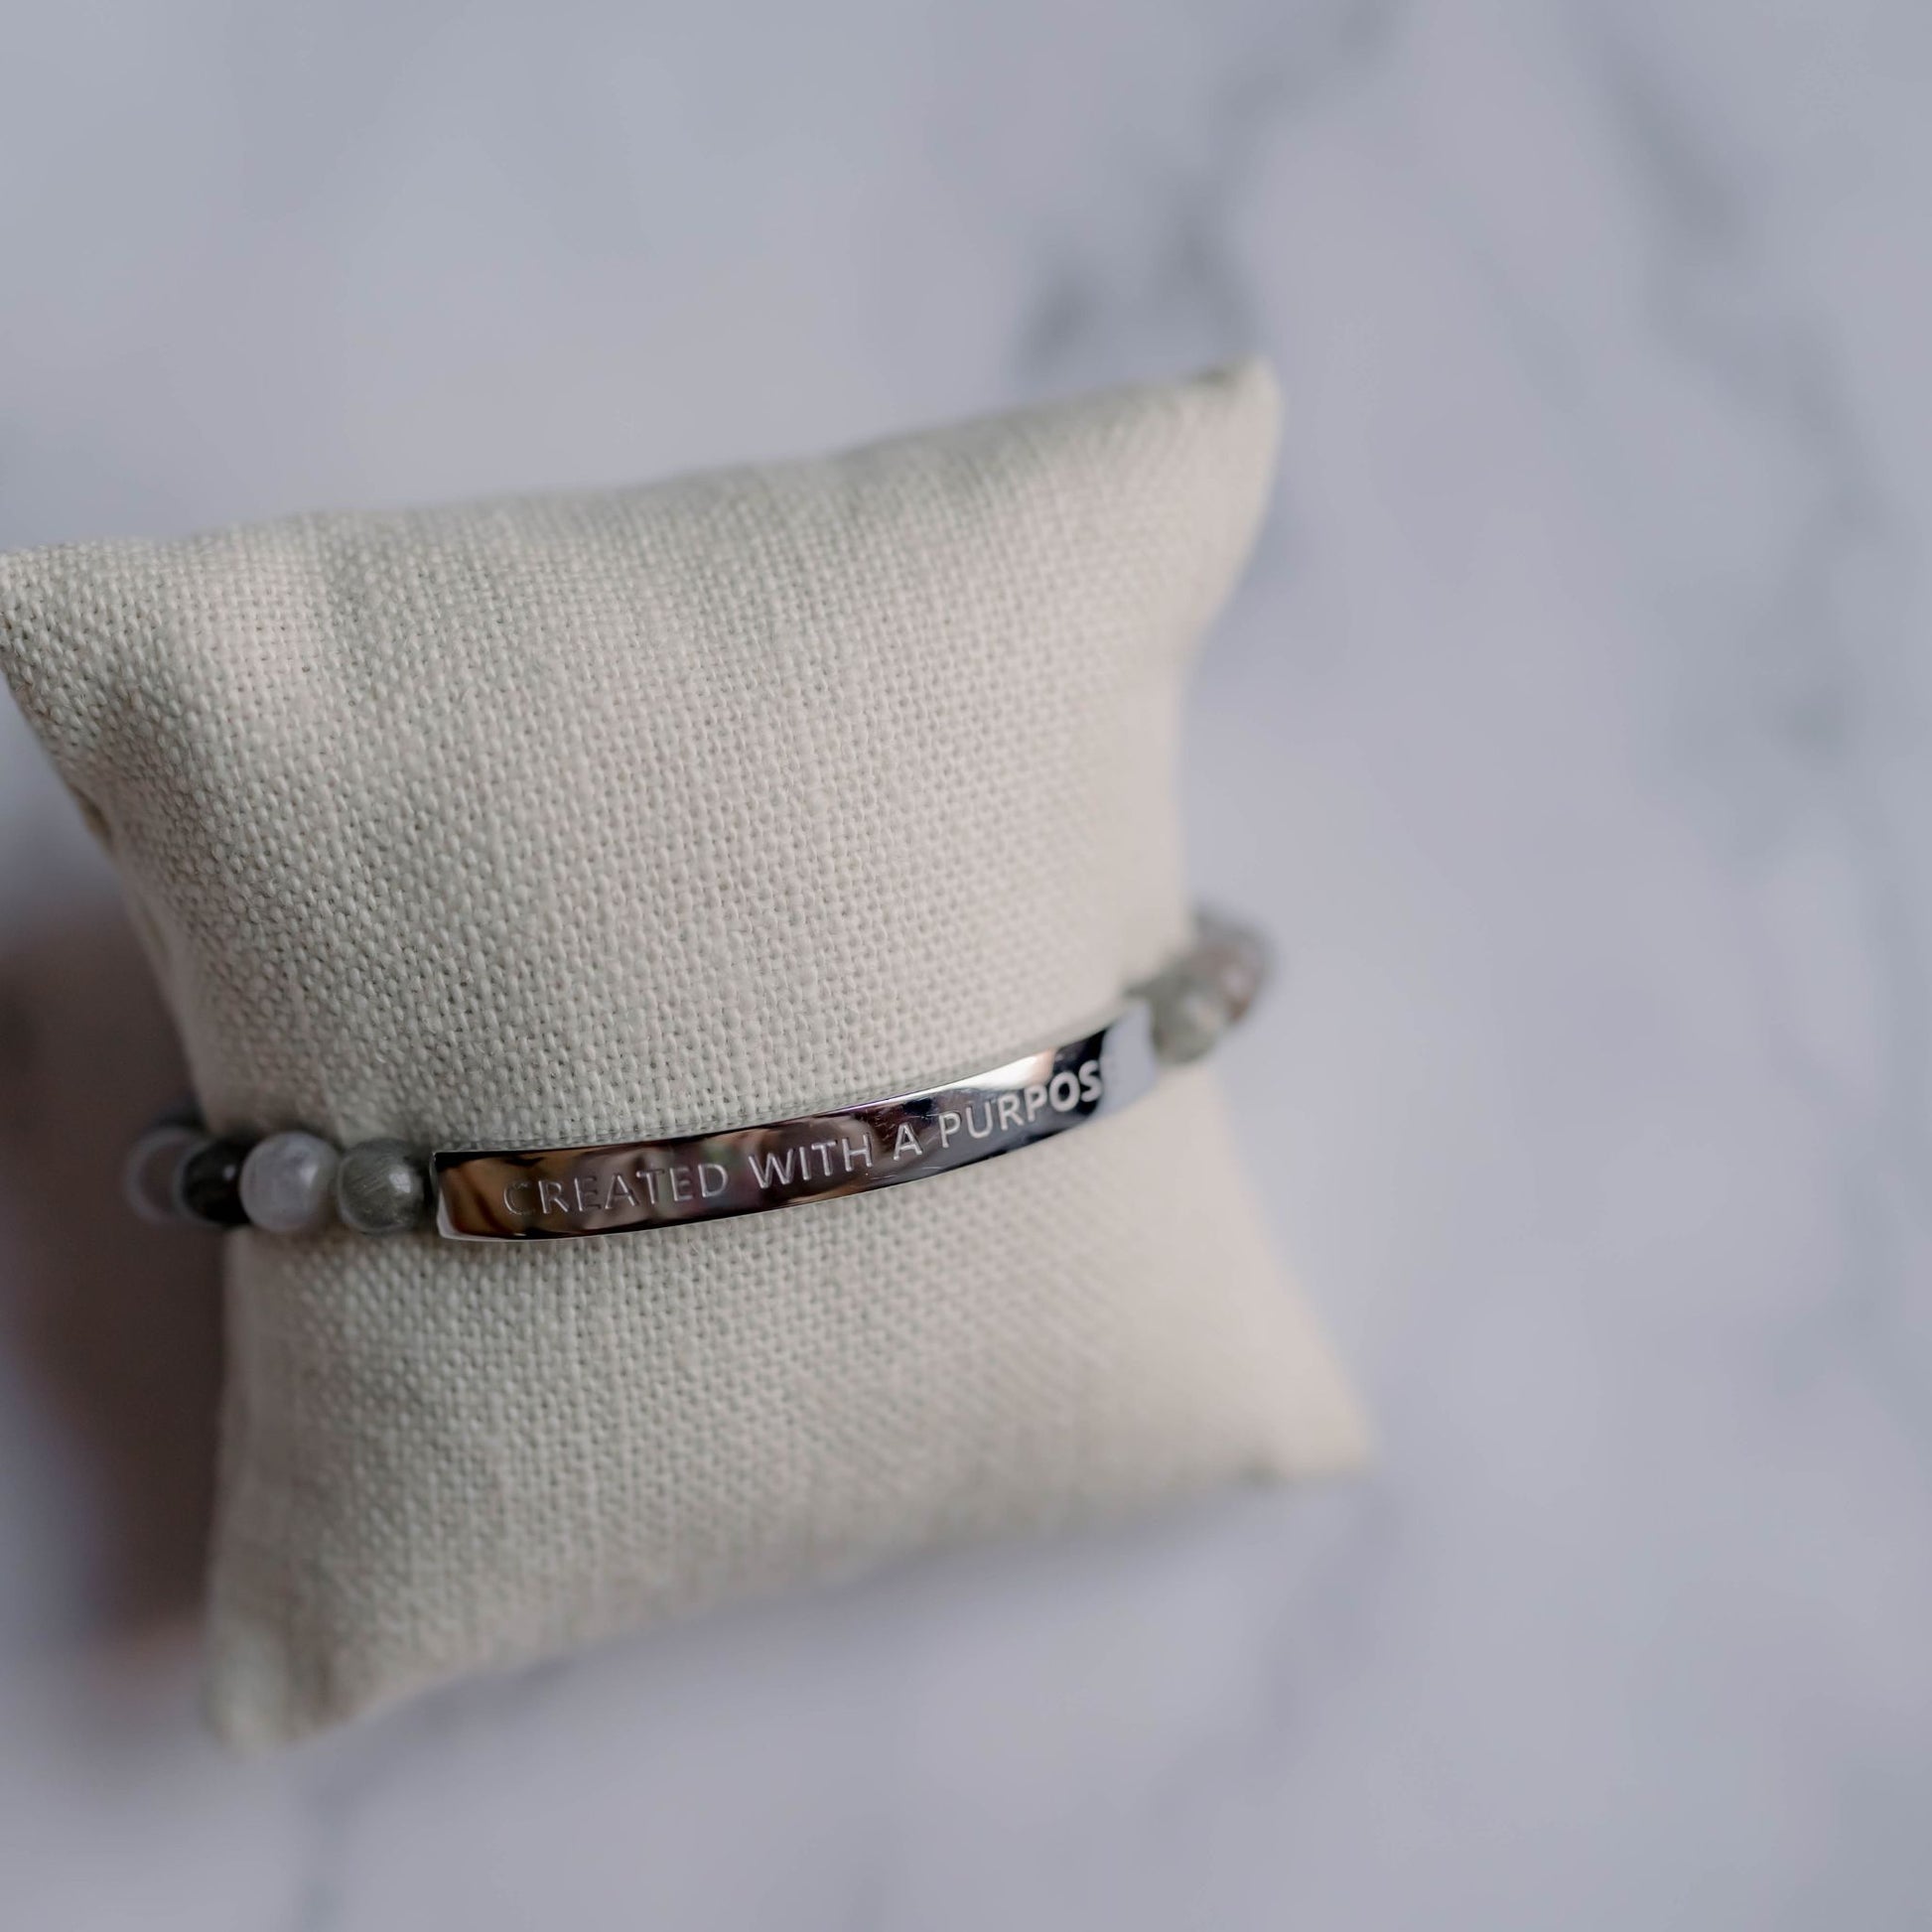 Close-up of 'Created With A Purpose' Gemstone Bead Bracelet